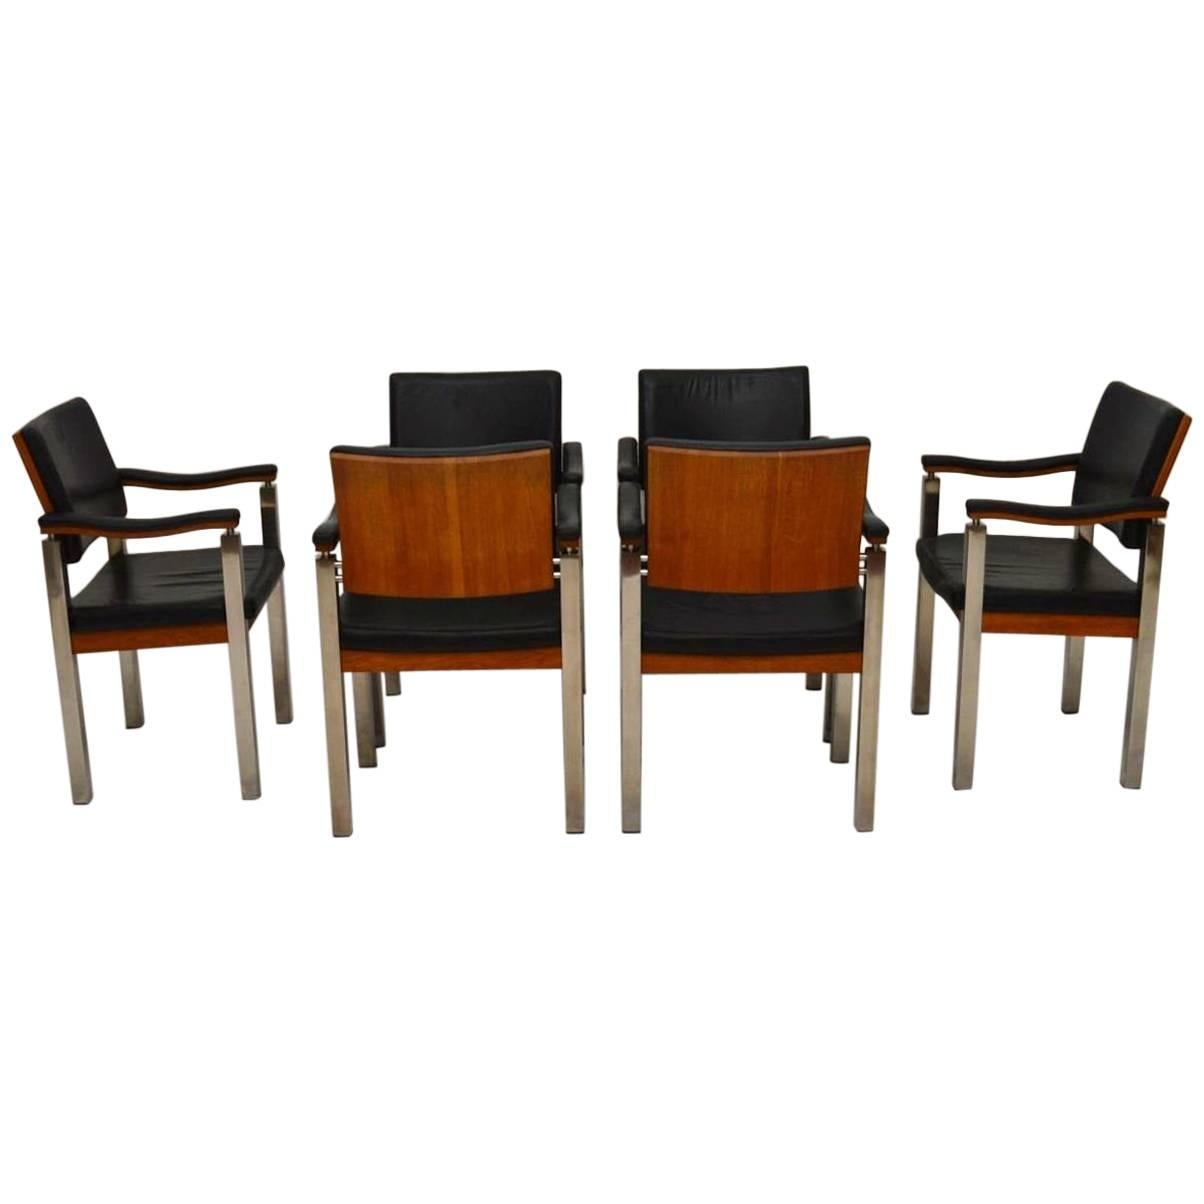 Set of Six Vintage Dining Chairs in Teak, Leather and Chrome